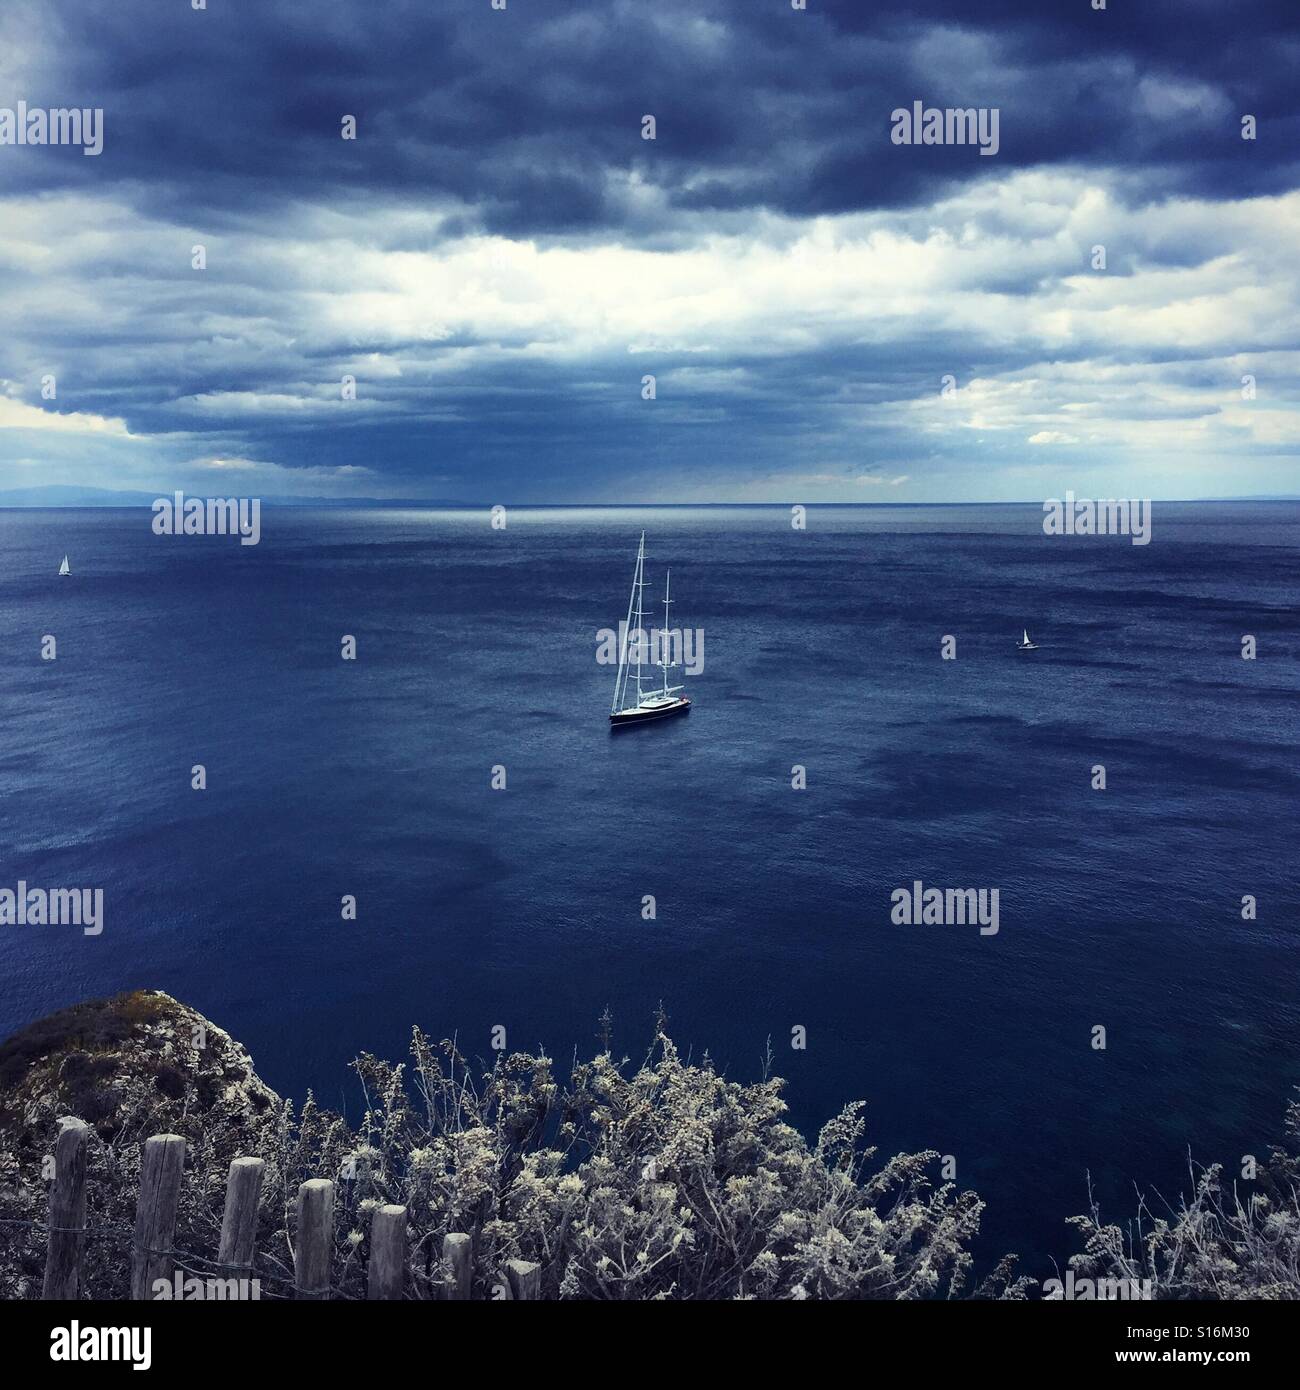 Looking out over the calm ocean at a yacht floating on the horizon under dramatic clouds Stock Photo